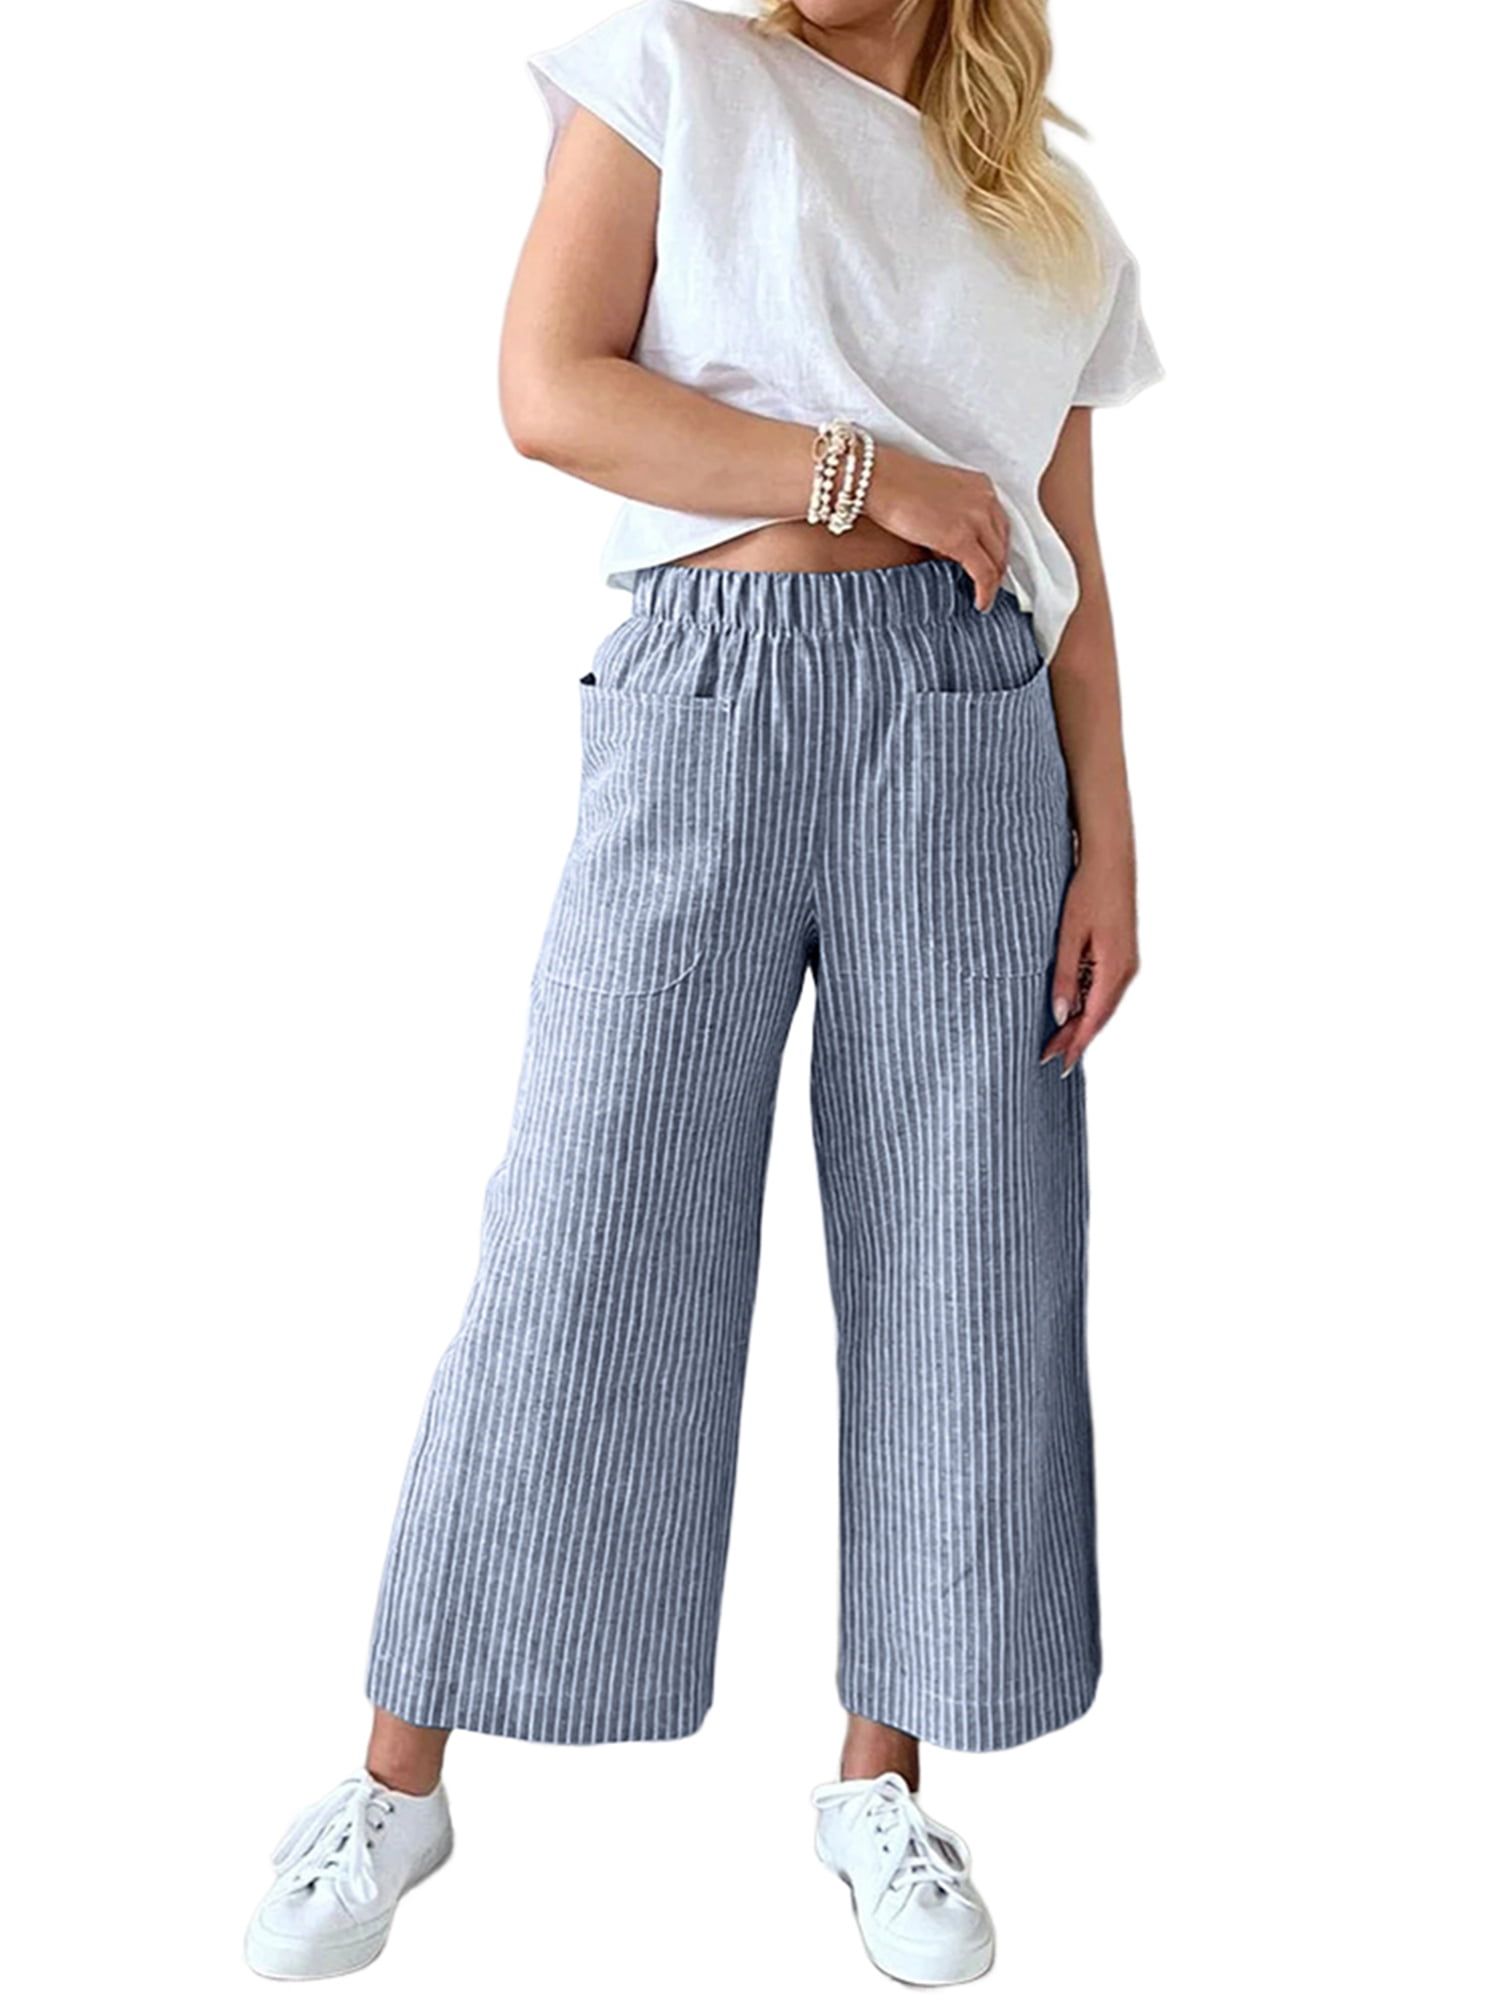 JustVH Women Striped Trousers Casual Wide Leg Loose Fit Chino Cropped ...